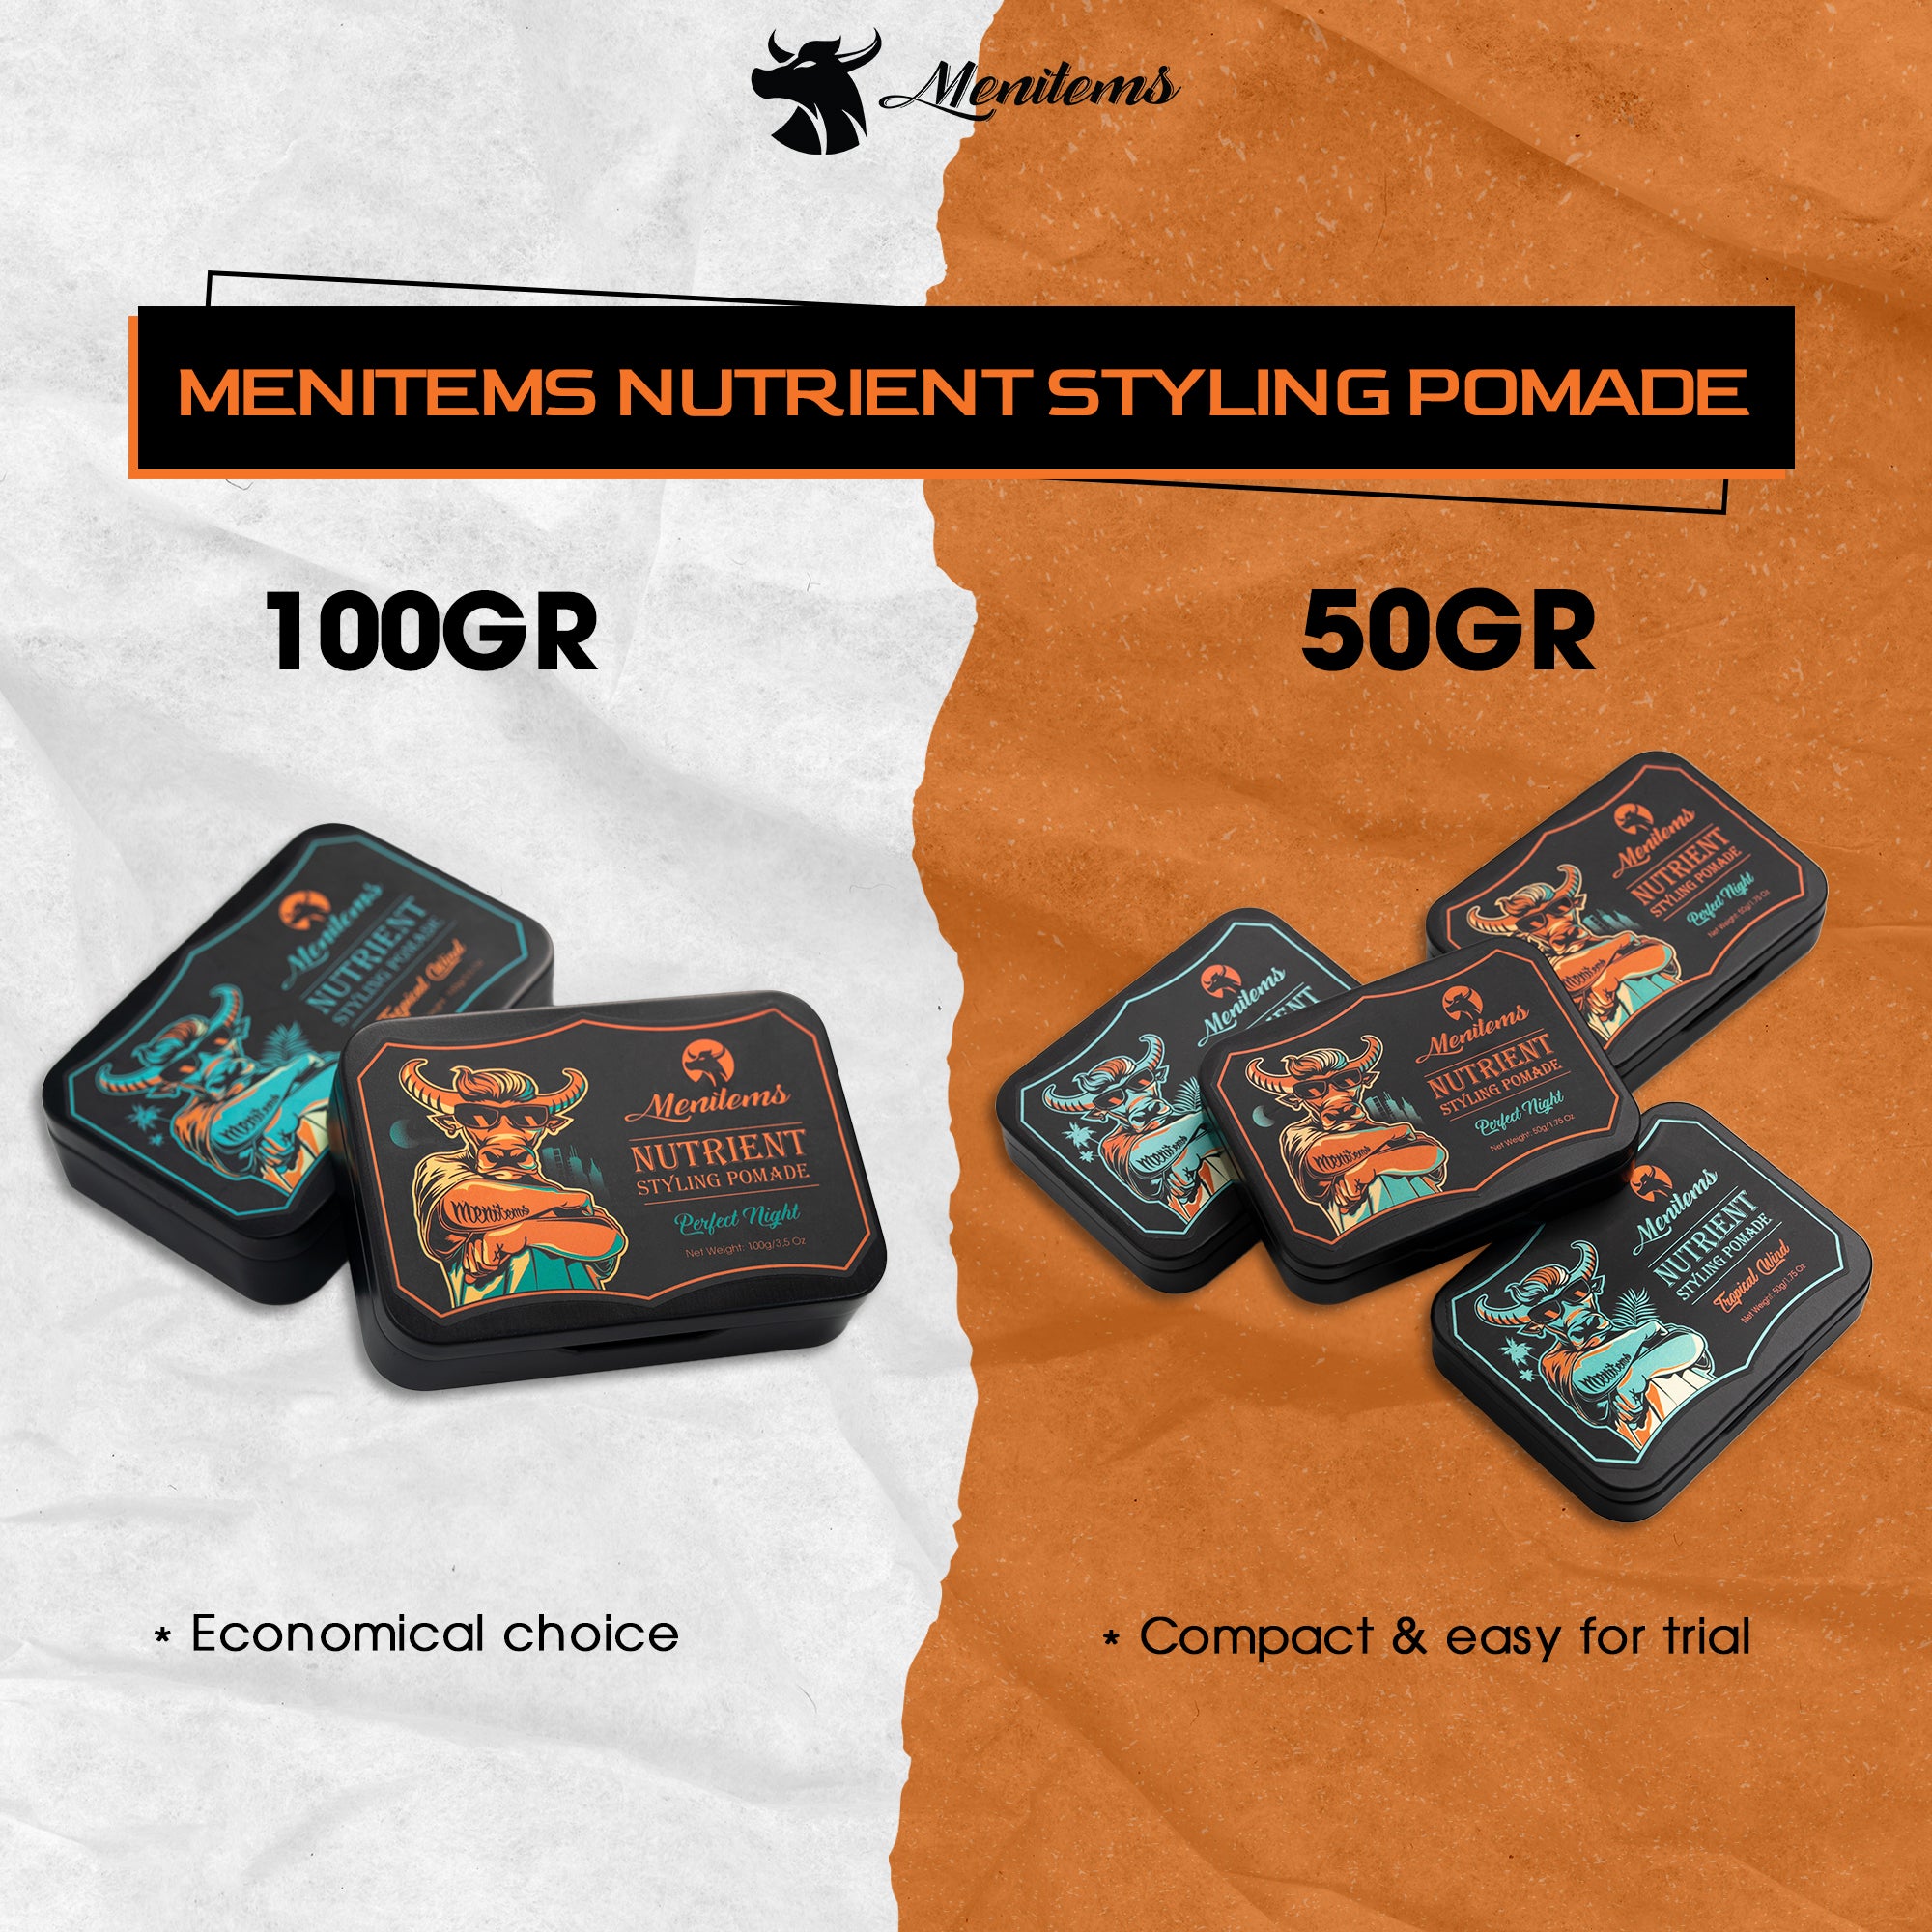 Nutrient Styling Pomade - Perfect Night 50gr